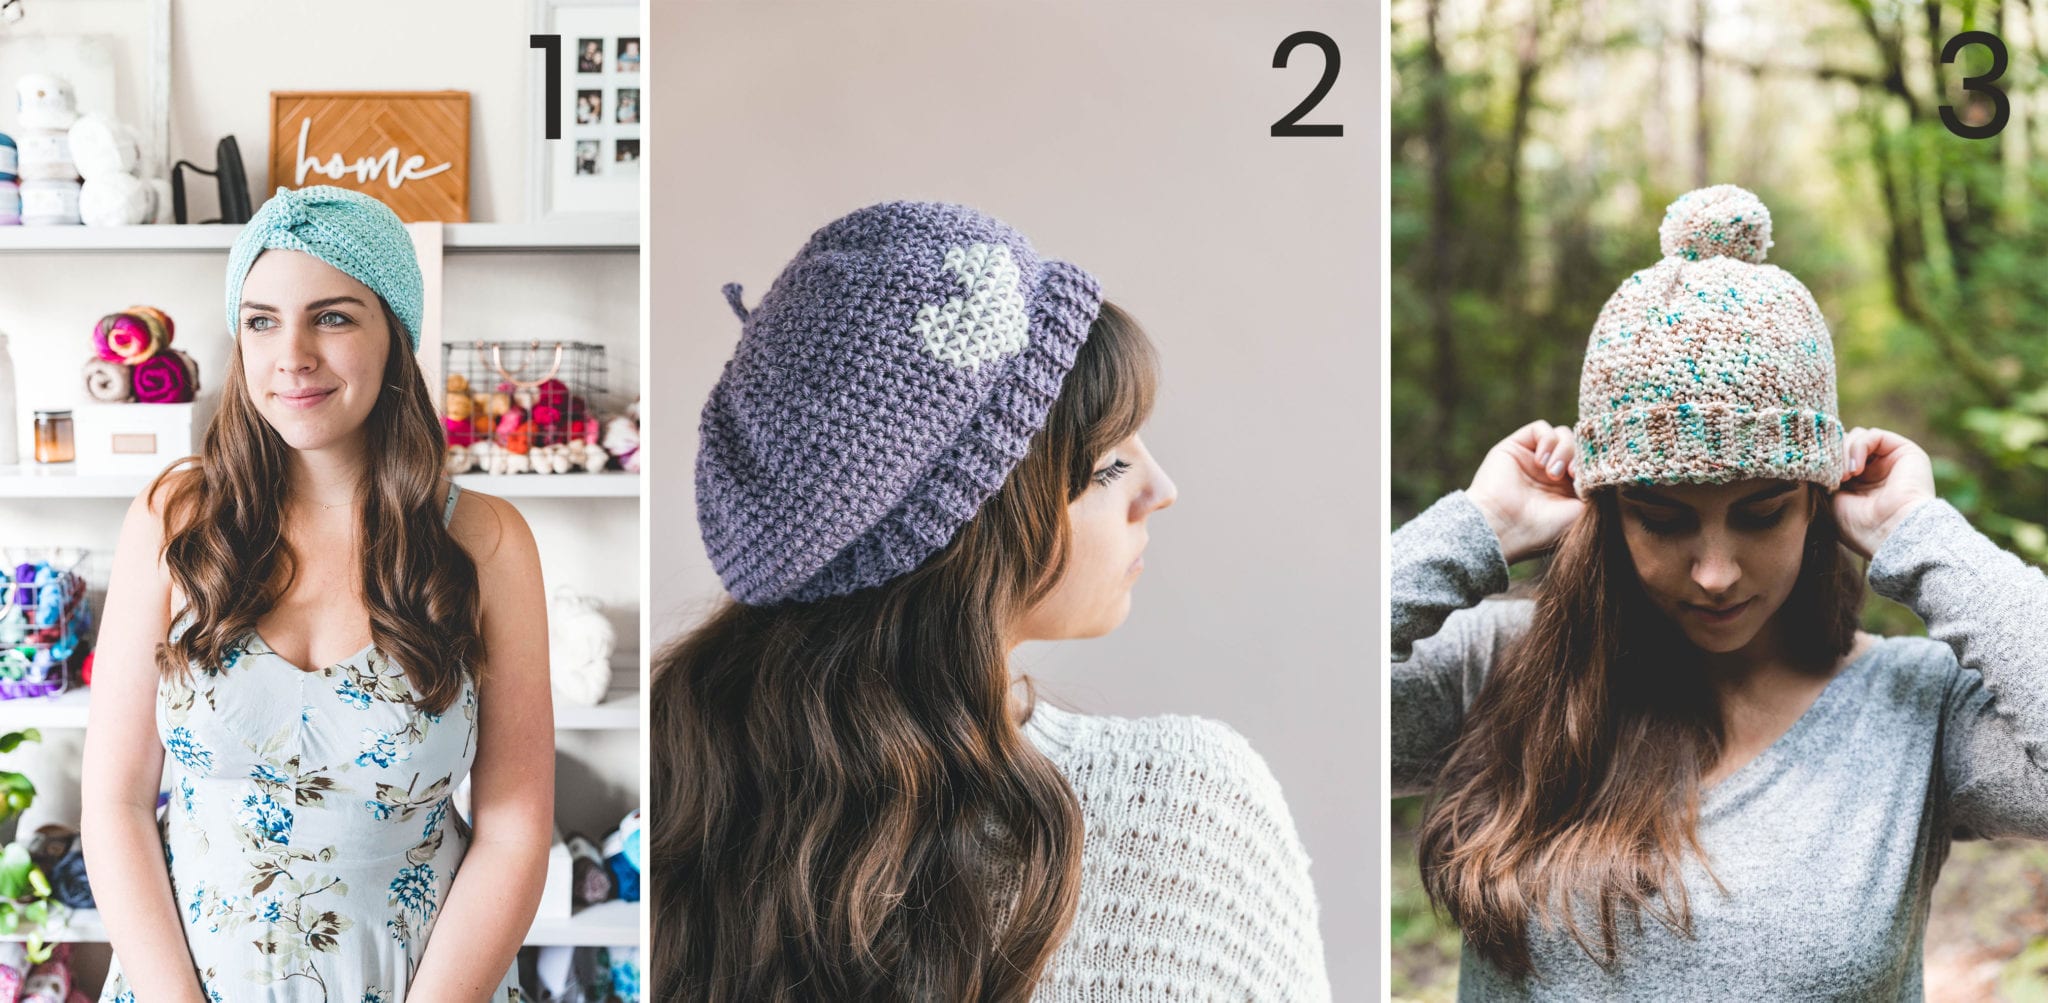 Easy crochet hat suggestion graphic with other free patterns from the sewrella blog.